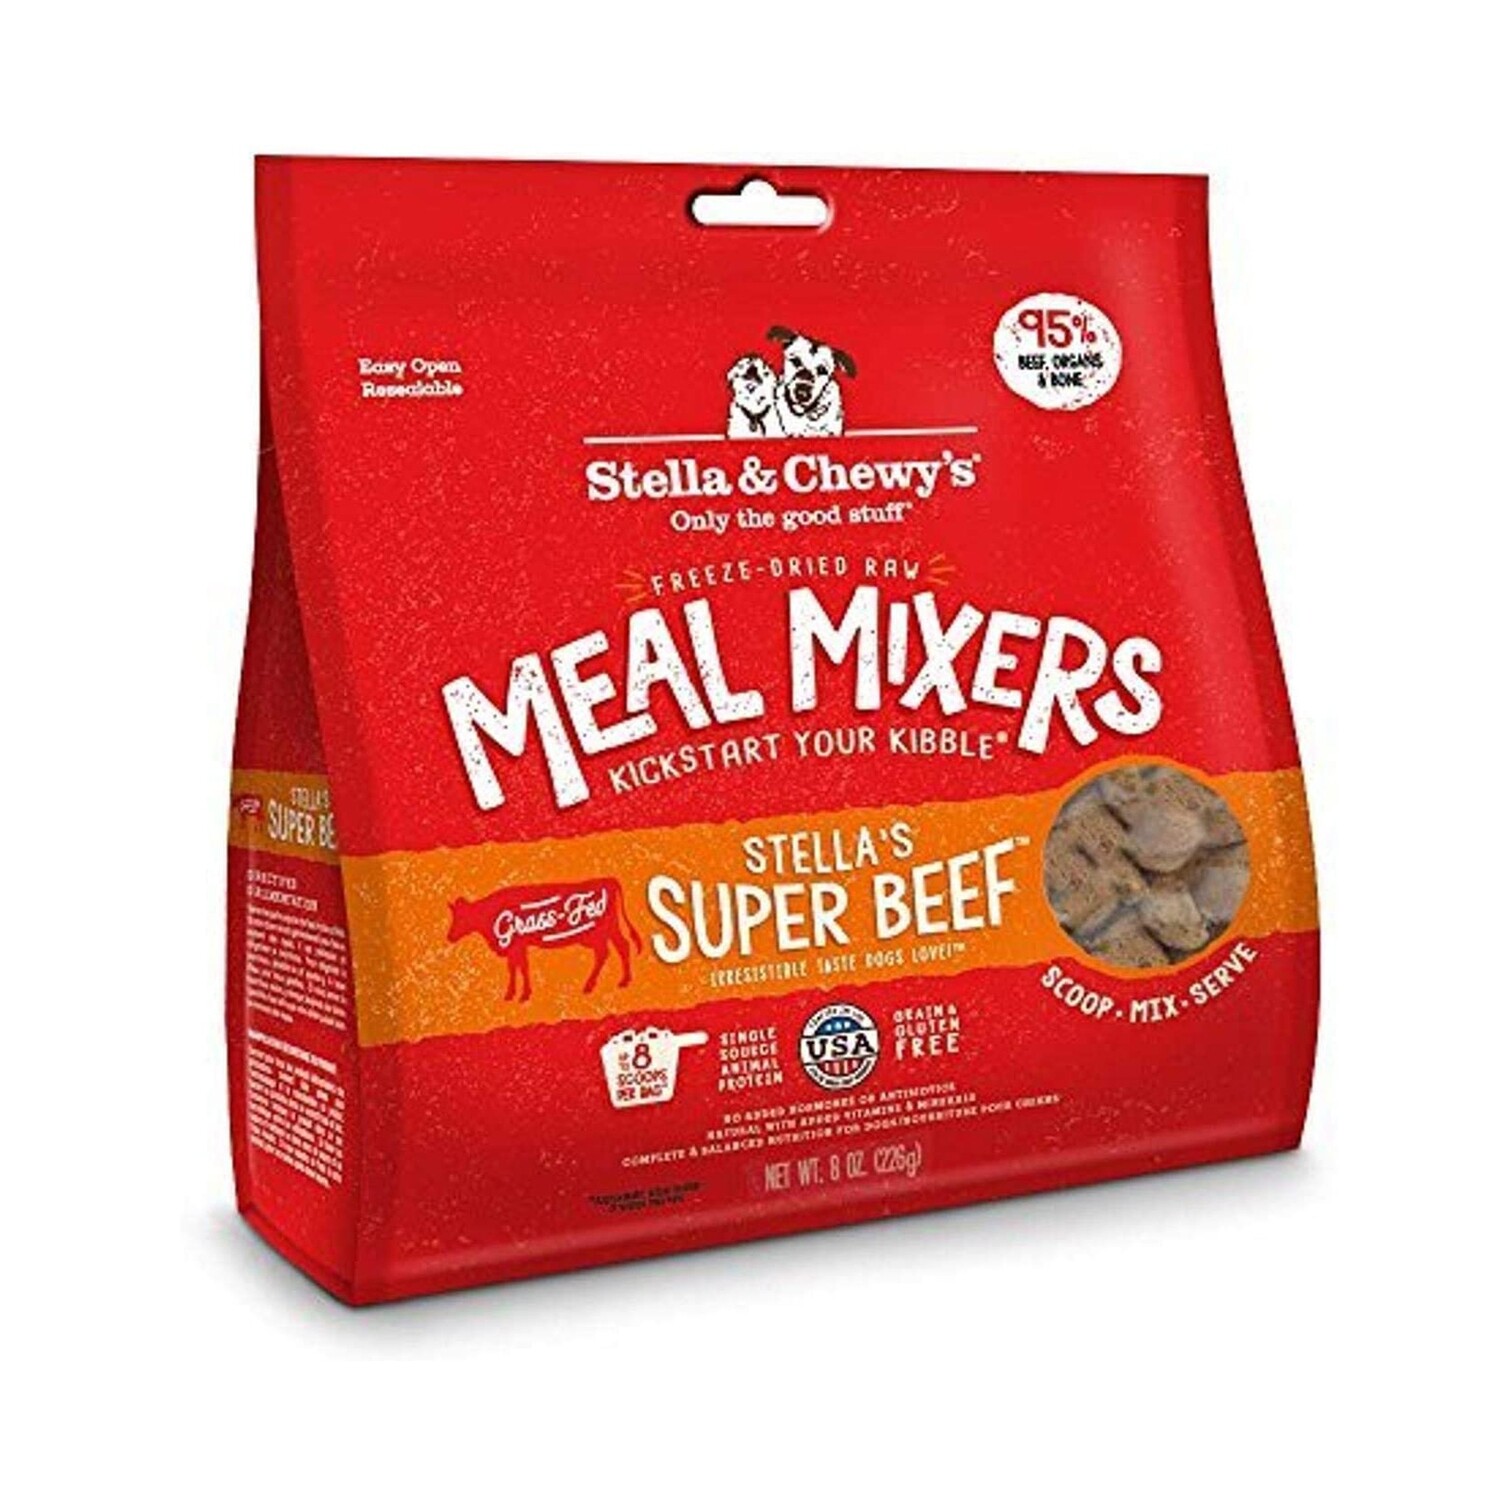 Stella & Chewy's Super Beef Freeze-Dried Meal Mixers For Dog